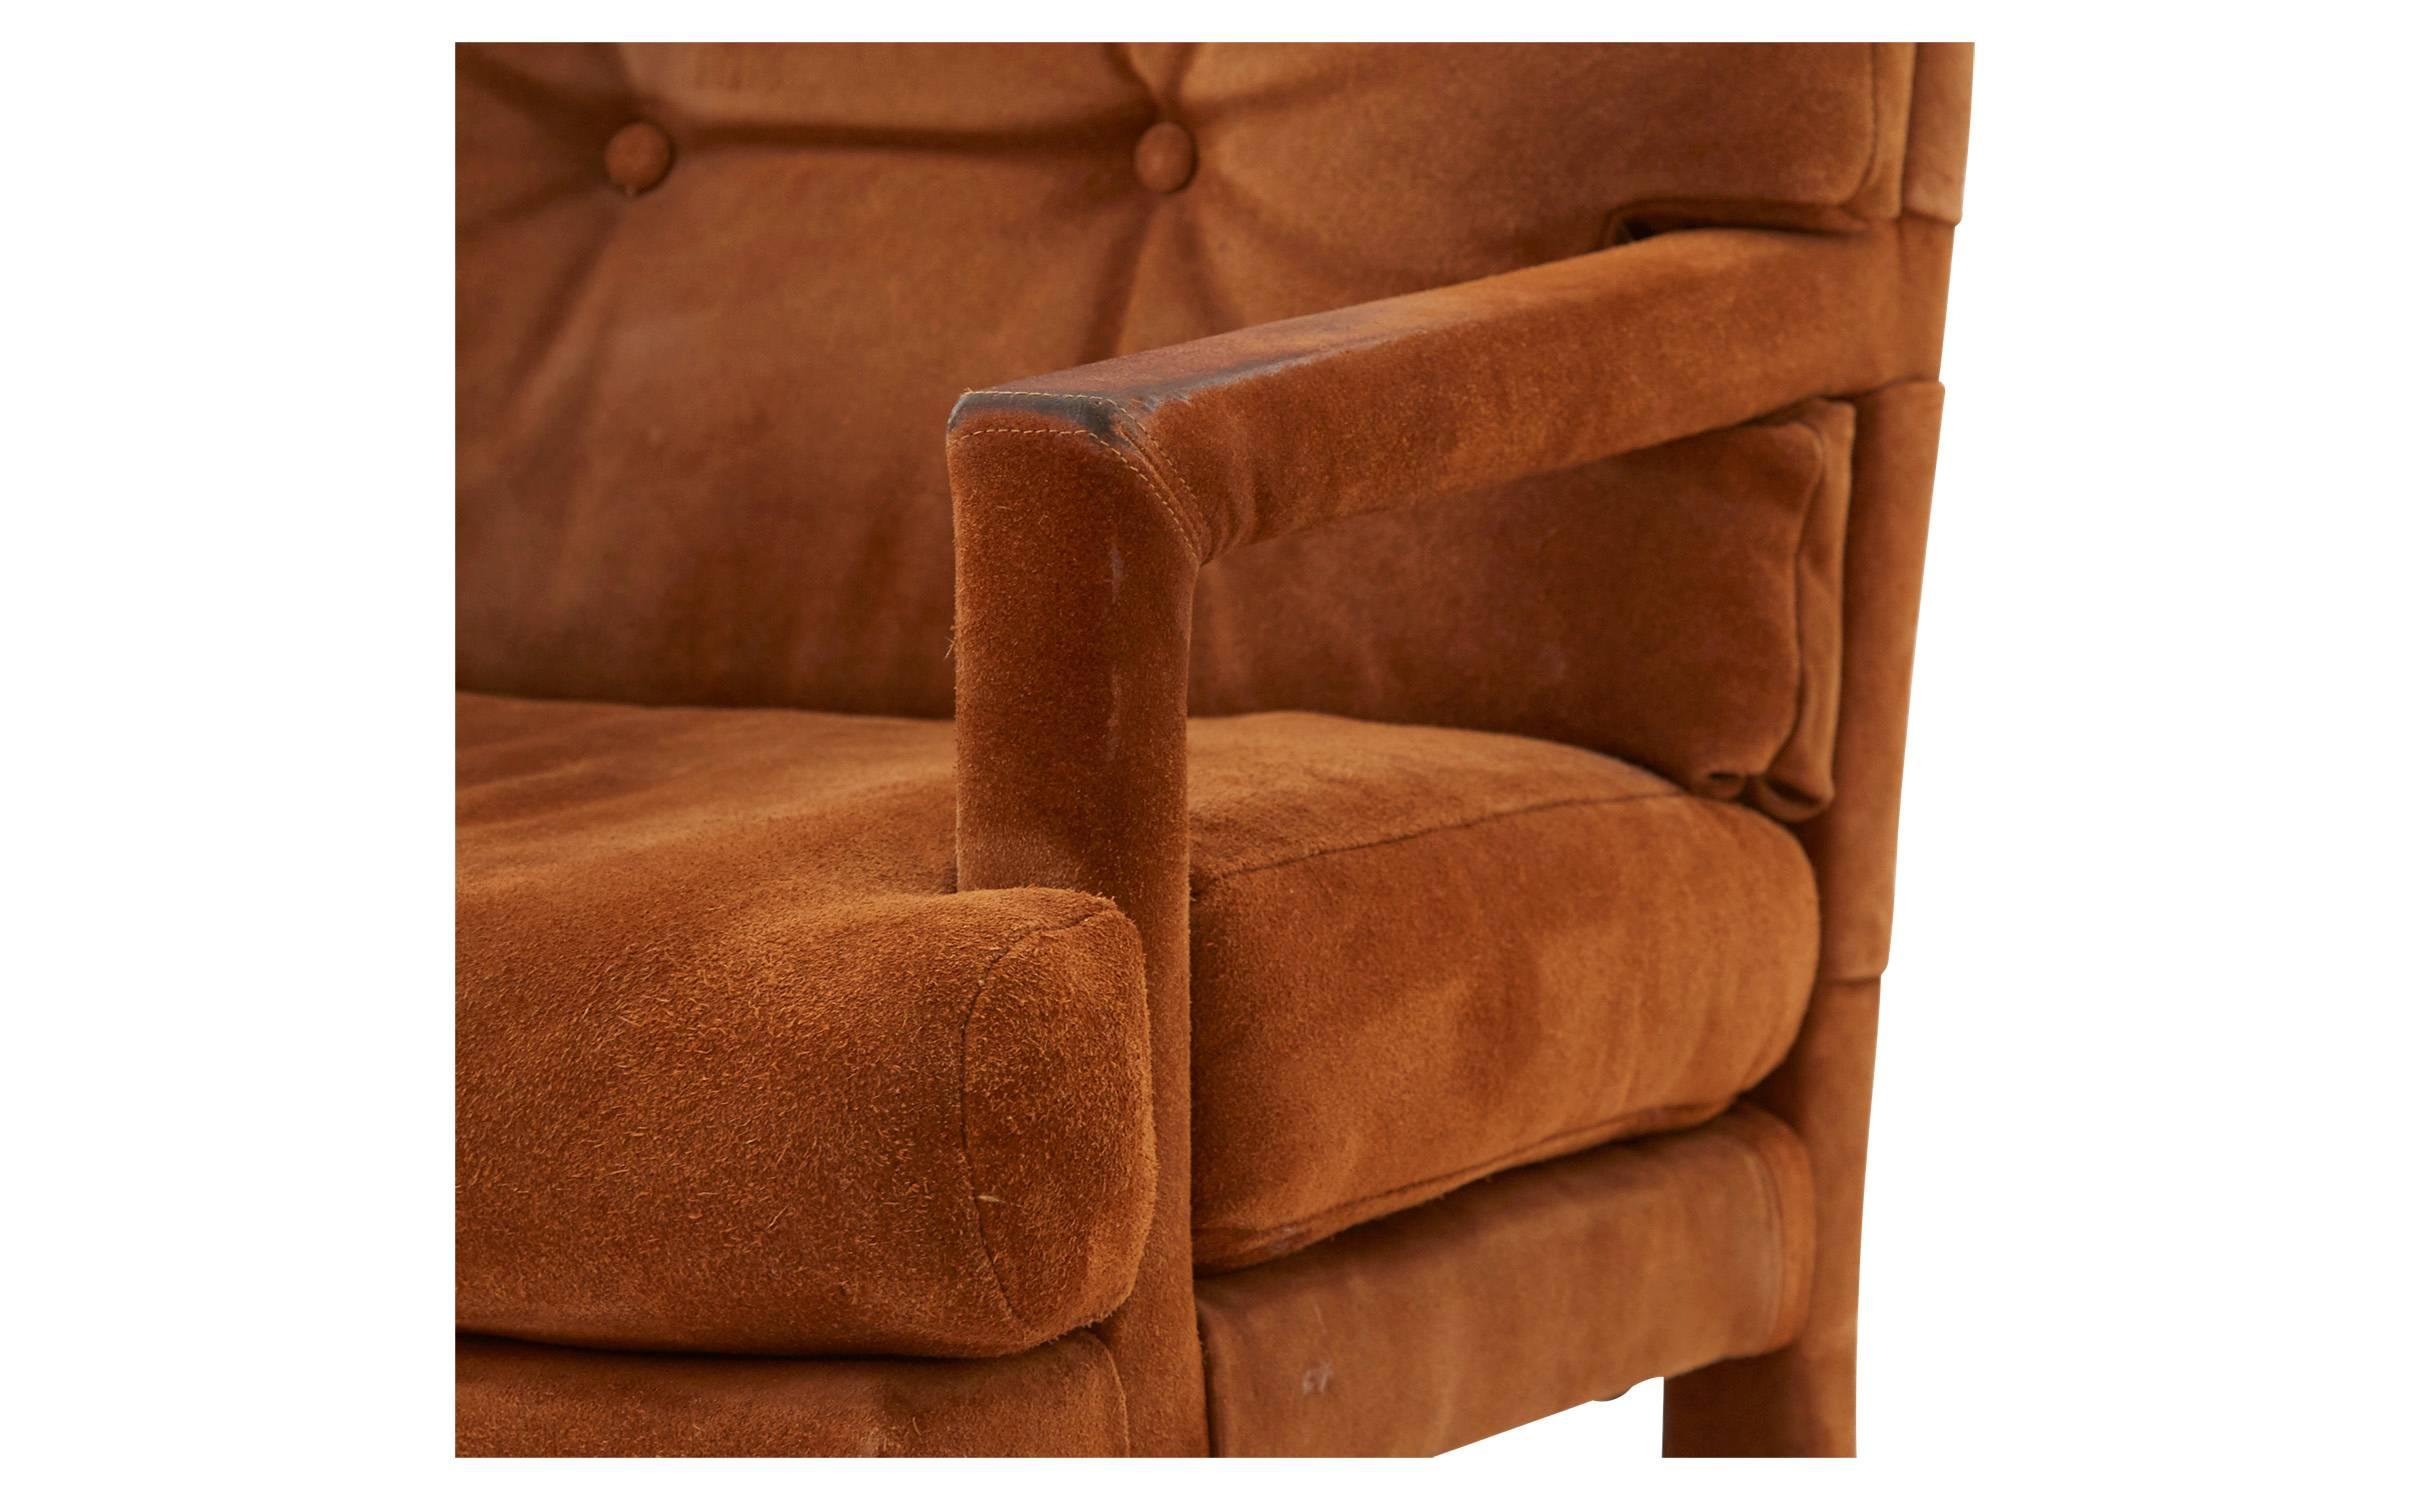 • Original brown suede upholstery with a tufted back
• 20th century
• American

Dimensions
• overall 24' W x 28' D x 35' H 
• seat height 19.5' H 
• arm height 25' H.